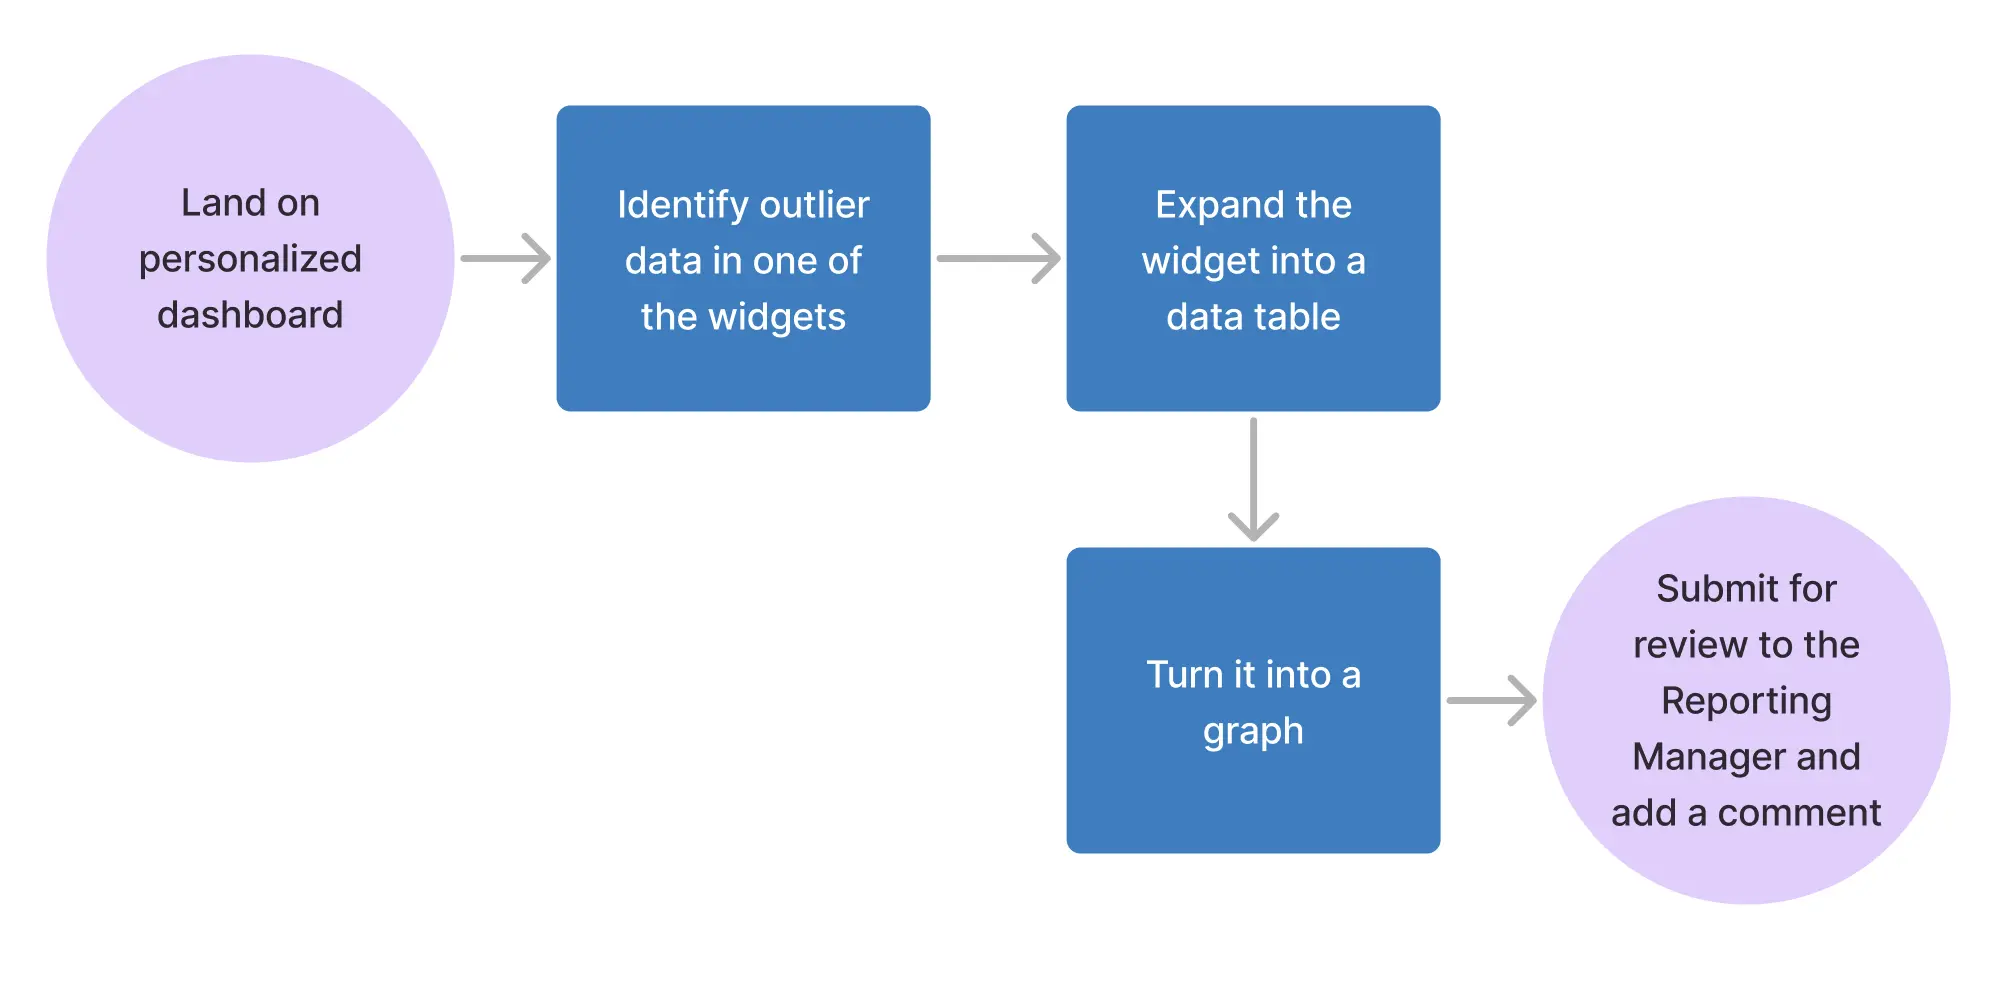 Flowchart showing user journey for an analyst: start on ERP dashboard, identify outliers, expand to data table, create graph, submit for review, add comment.